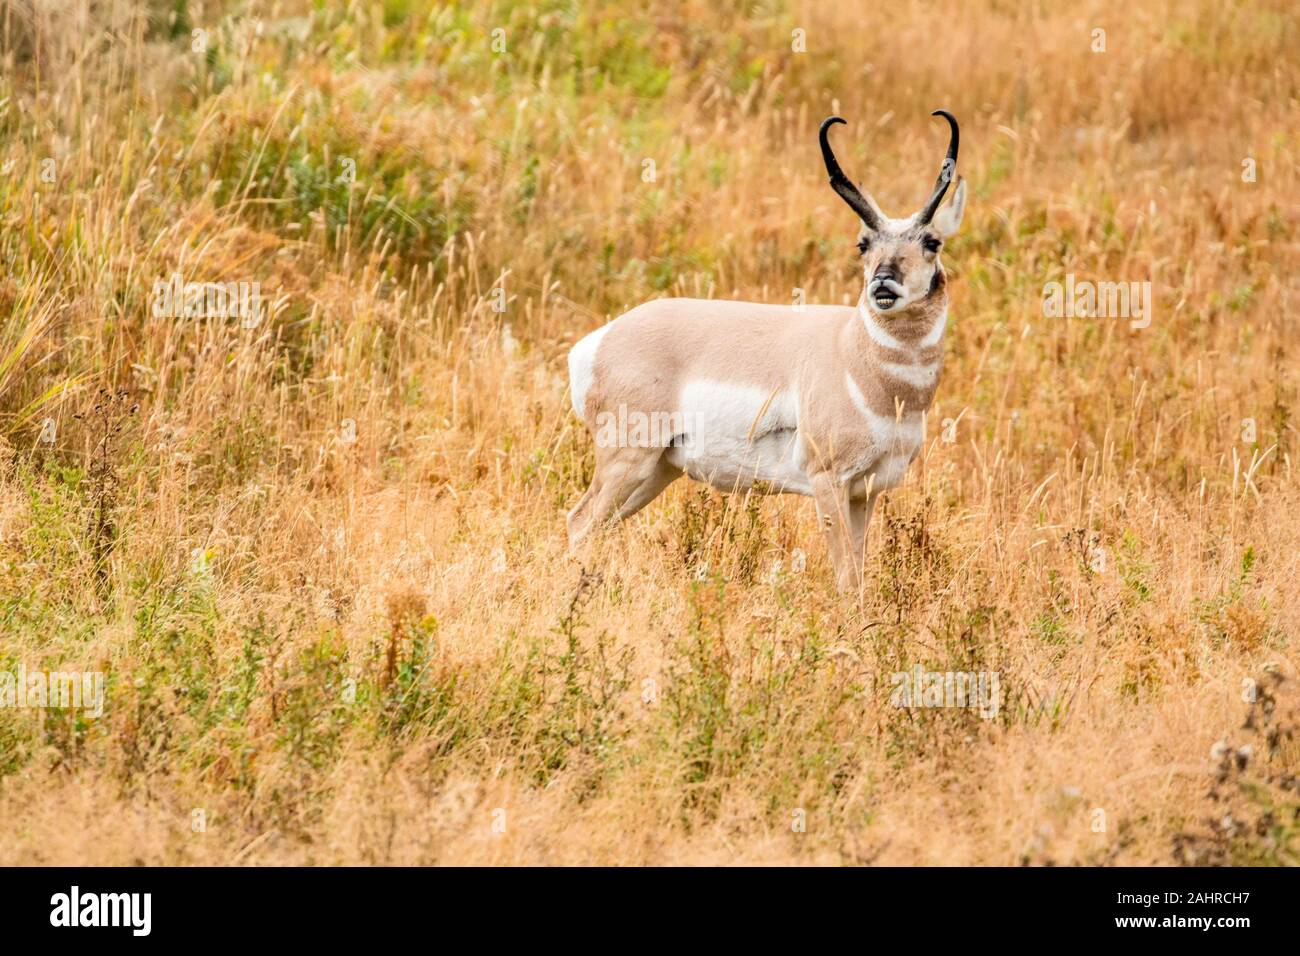 Male Pronghorn antelope vocalizing in Yellowstone National Park, Wyoming, USA Stock Photo